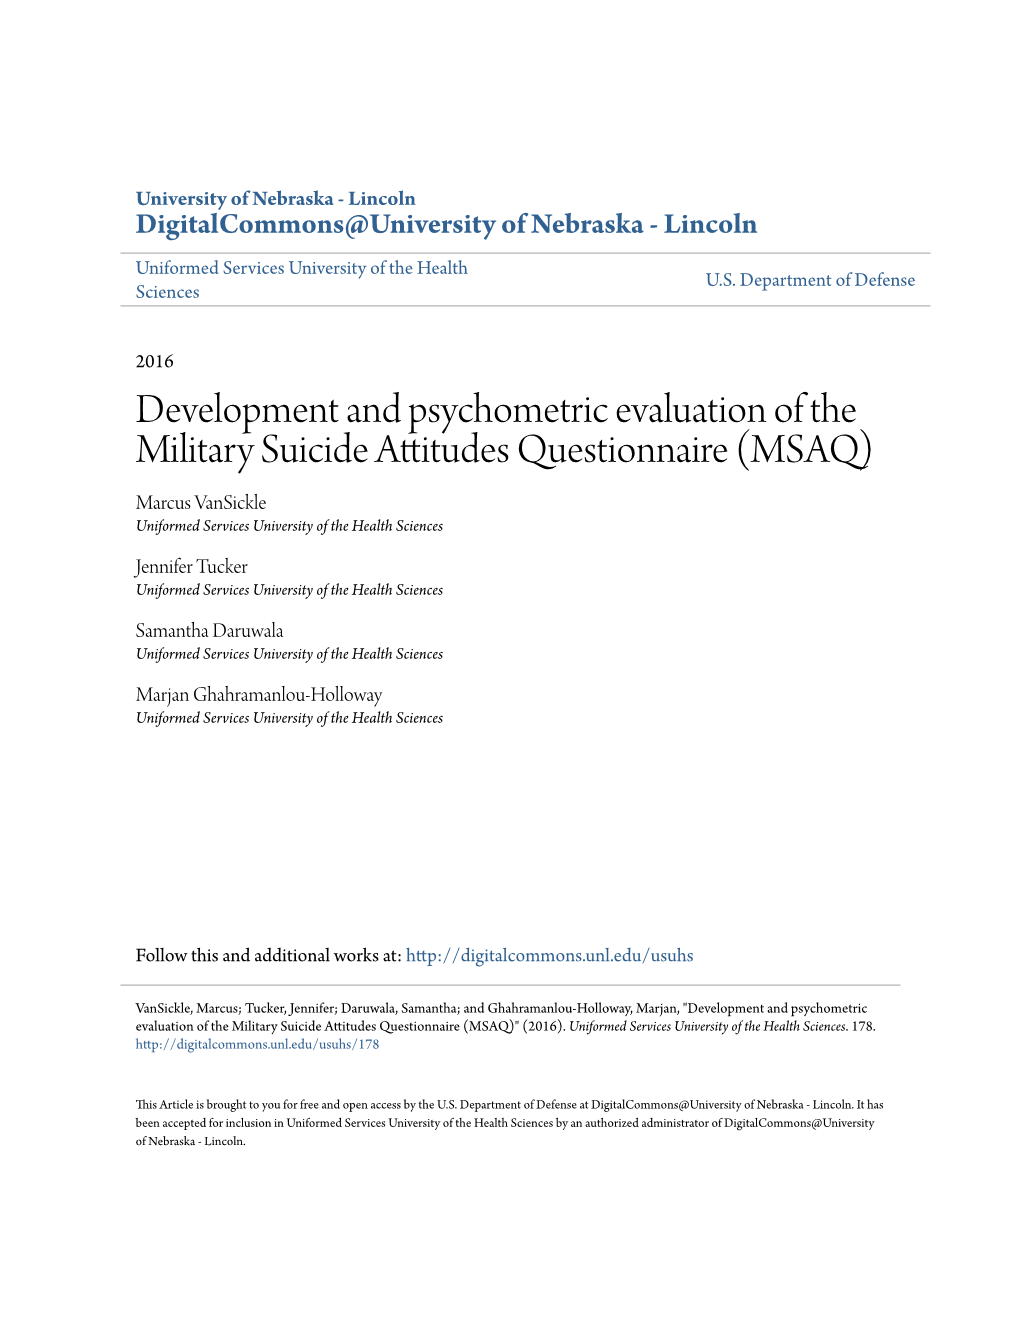 Development and Psychometric Evaluation of the Military Suicide Attitudes Questionnaire (MSAQ) Marcus Vansickle Uniformed Services University of the Health Sciences